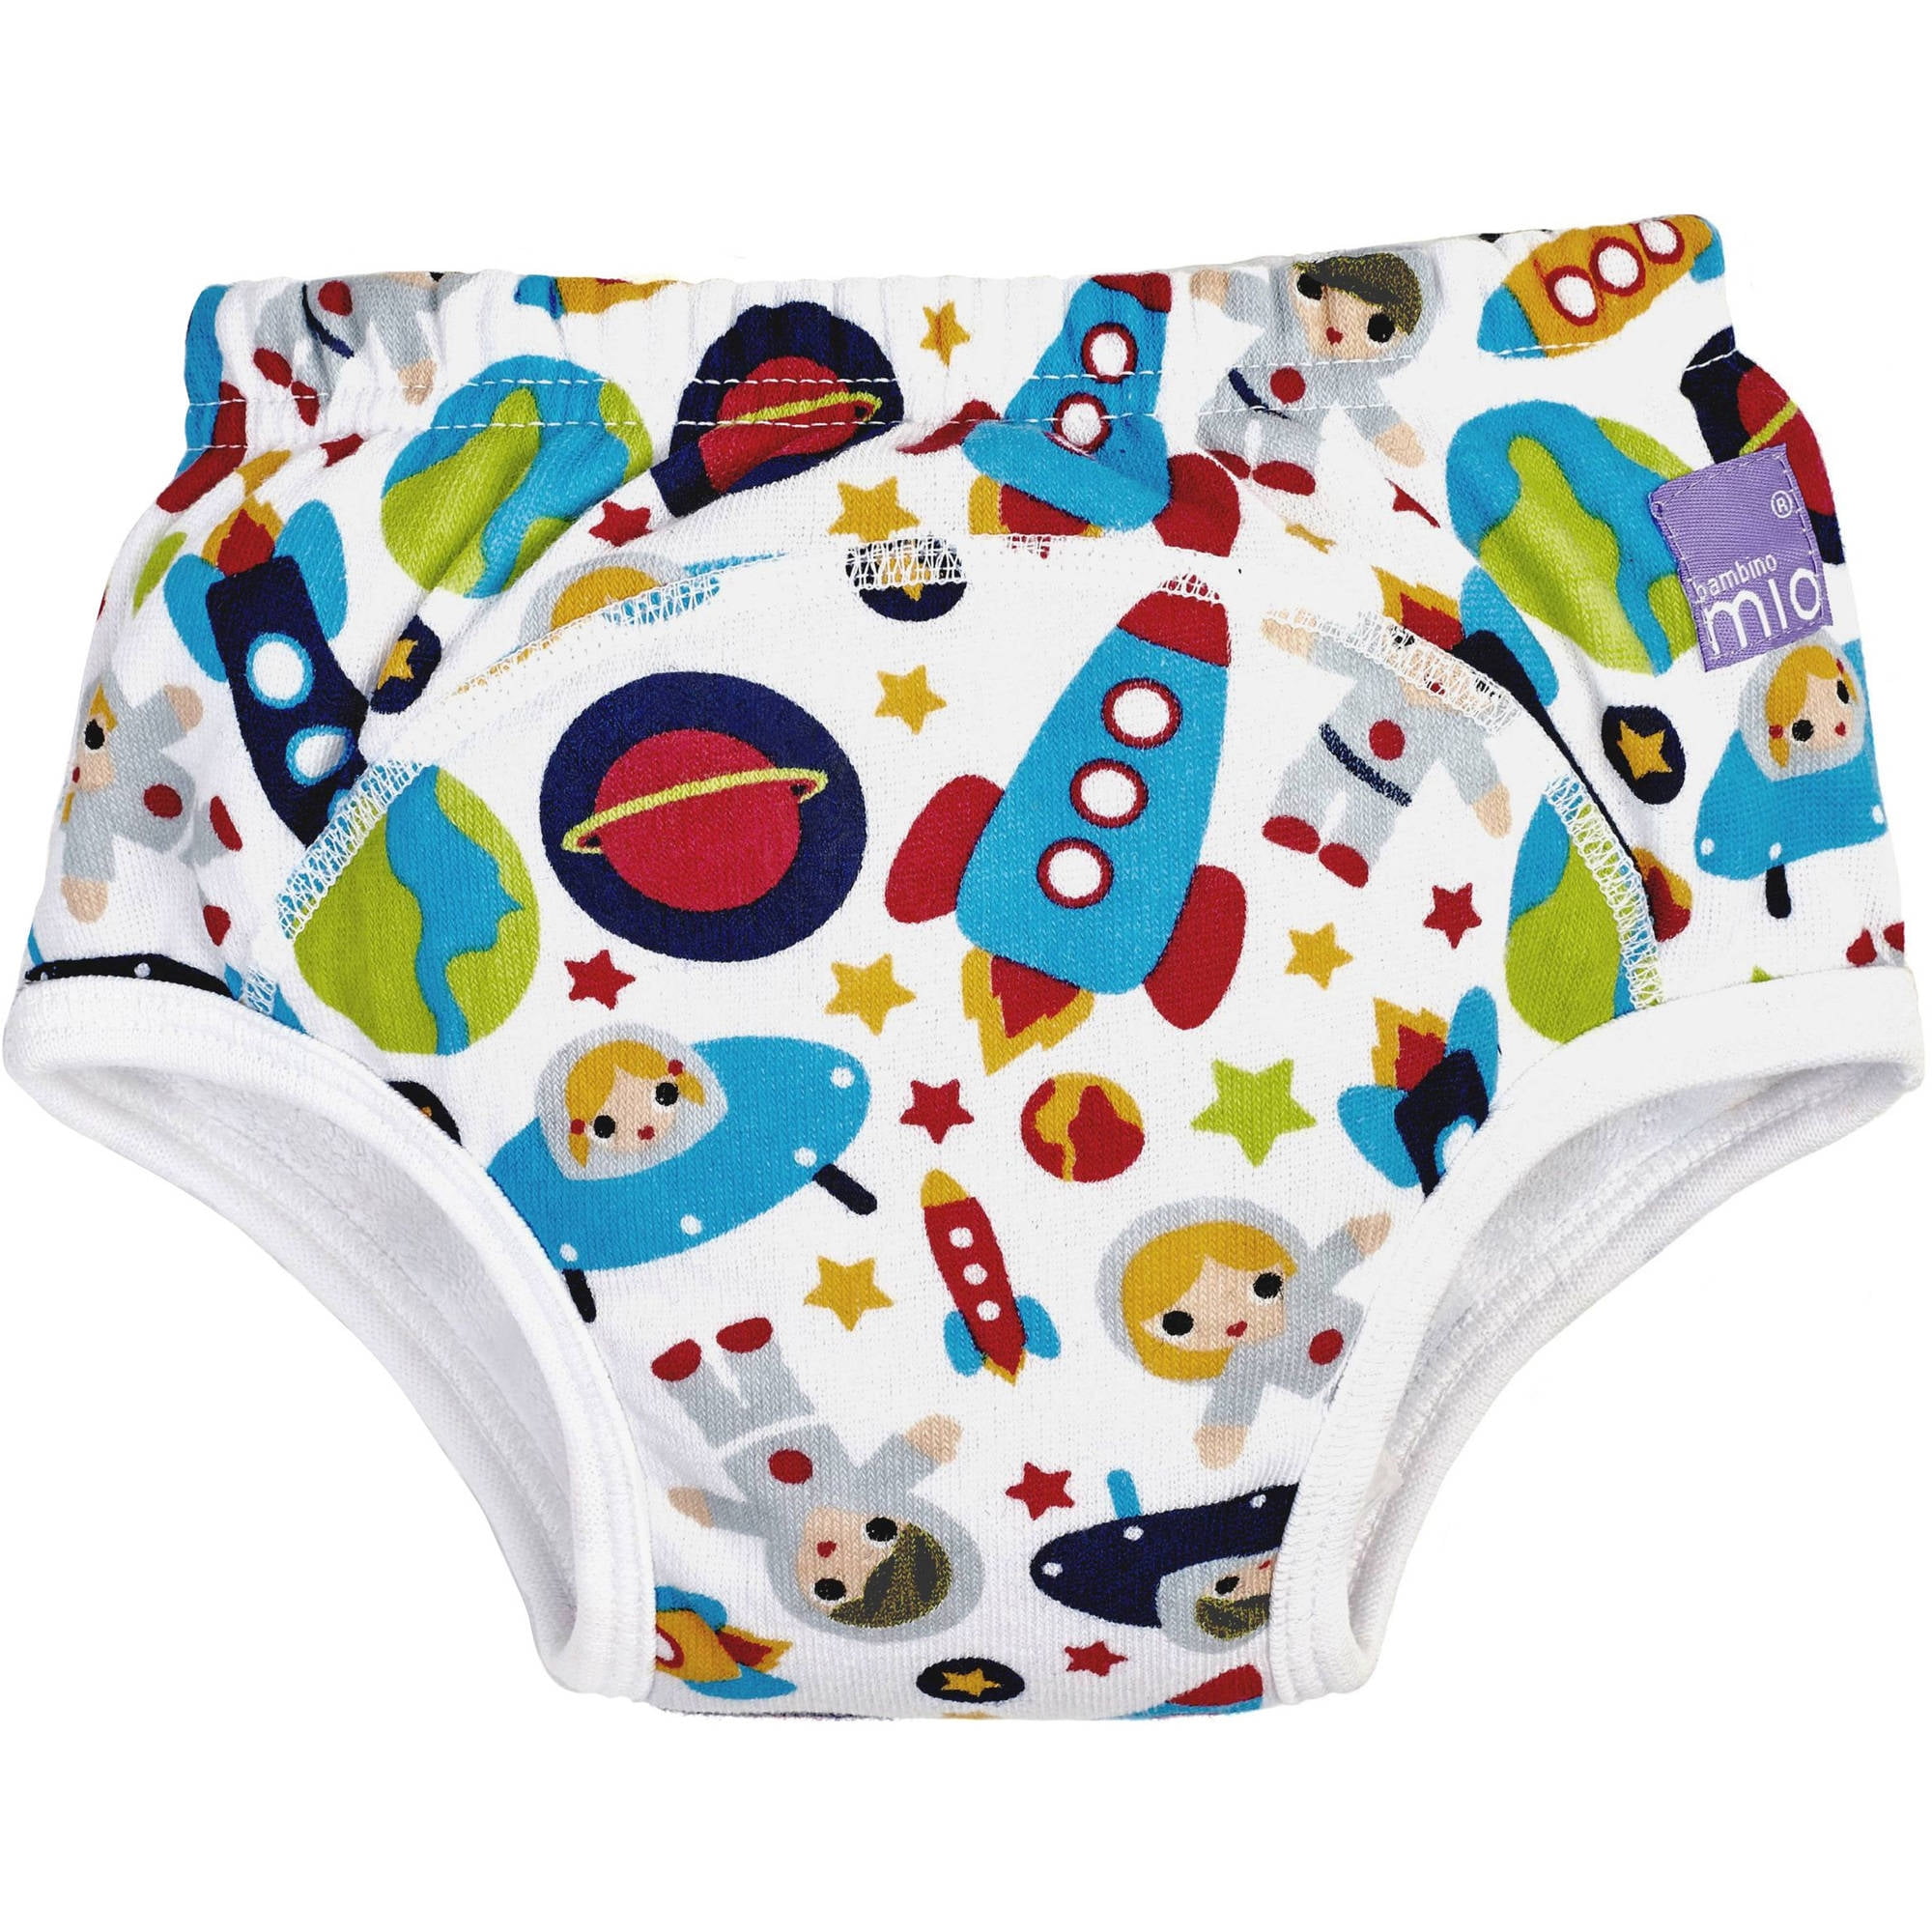 Bambino Mio - Potty Training Pants - Outer Space Edition - Choose